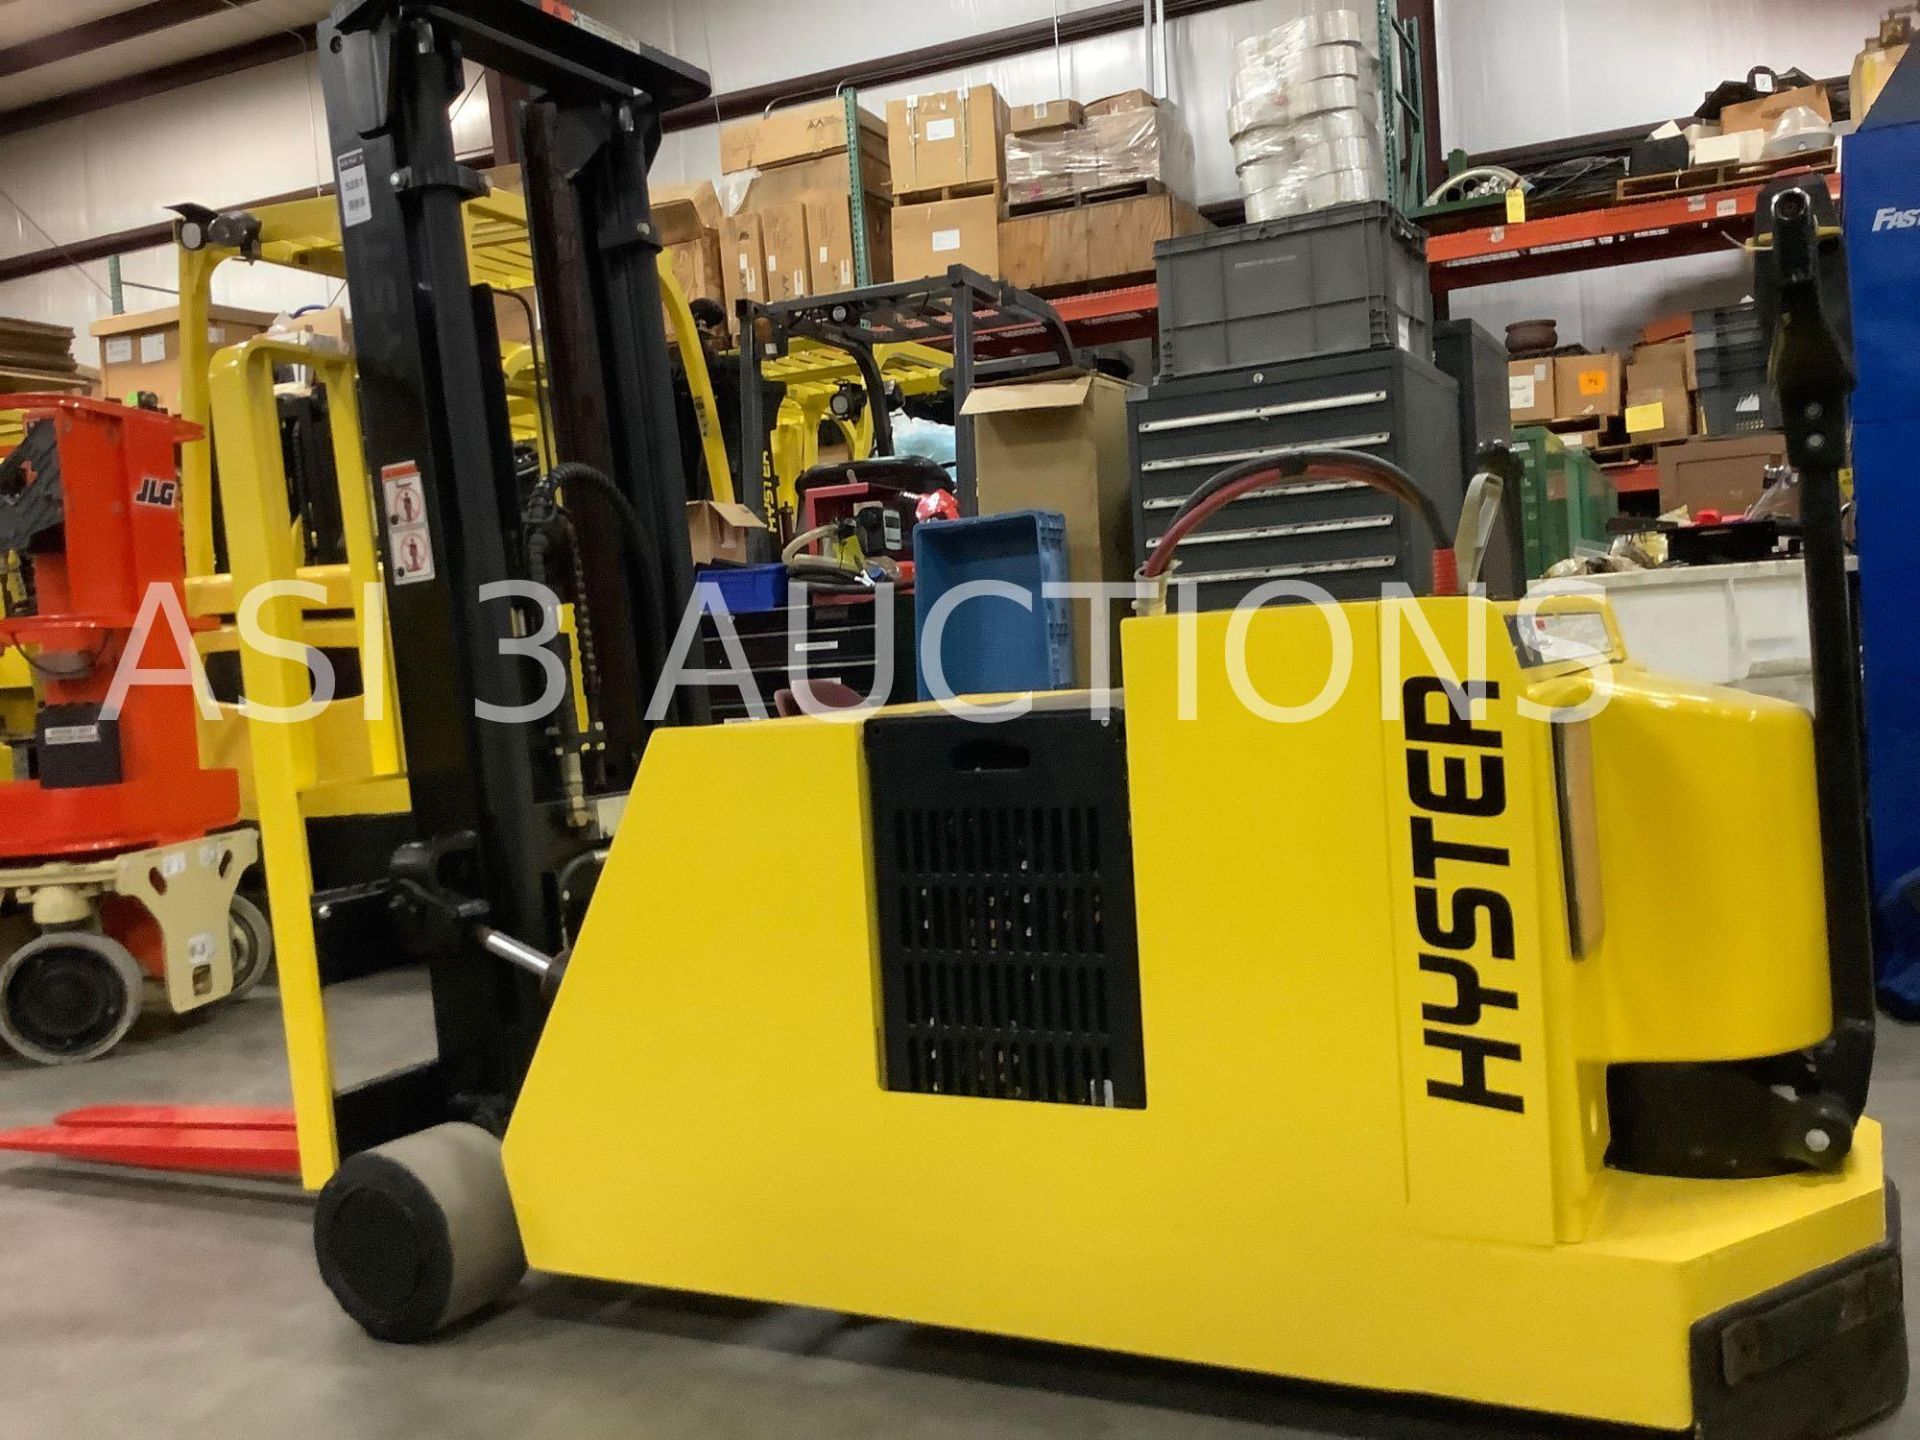 HYSTER FORK LIFT TILT TRUCK MODEL W40XTC MAX CAPACITY 4000lbs LOAD HEIGHT 104.5 RUNS & OPERATES - Image 3 of 9